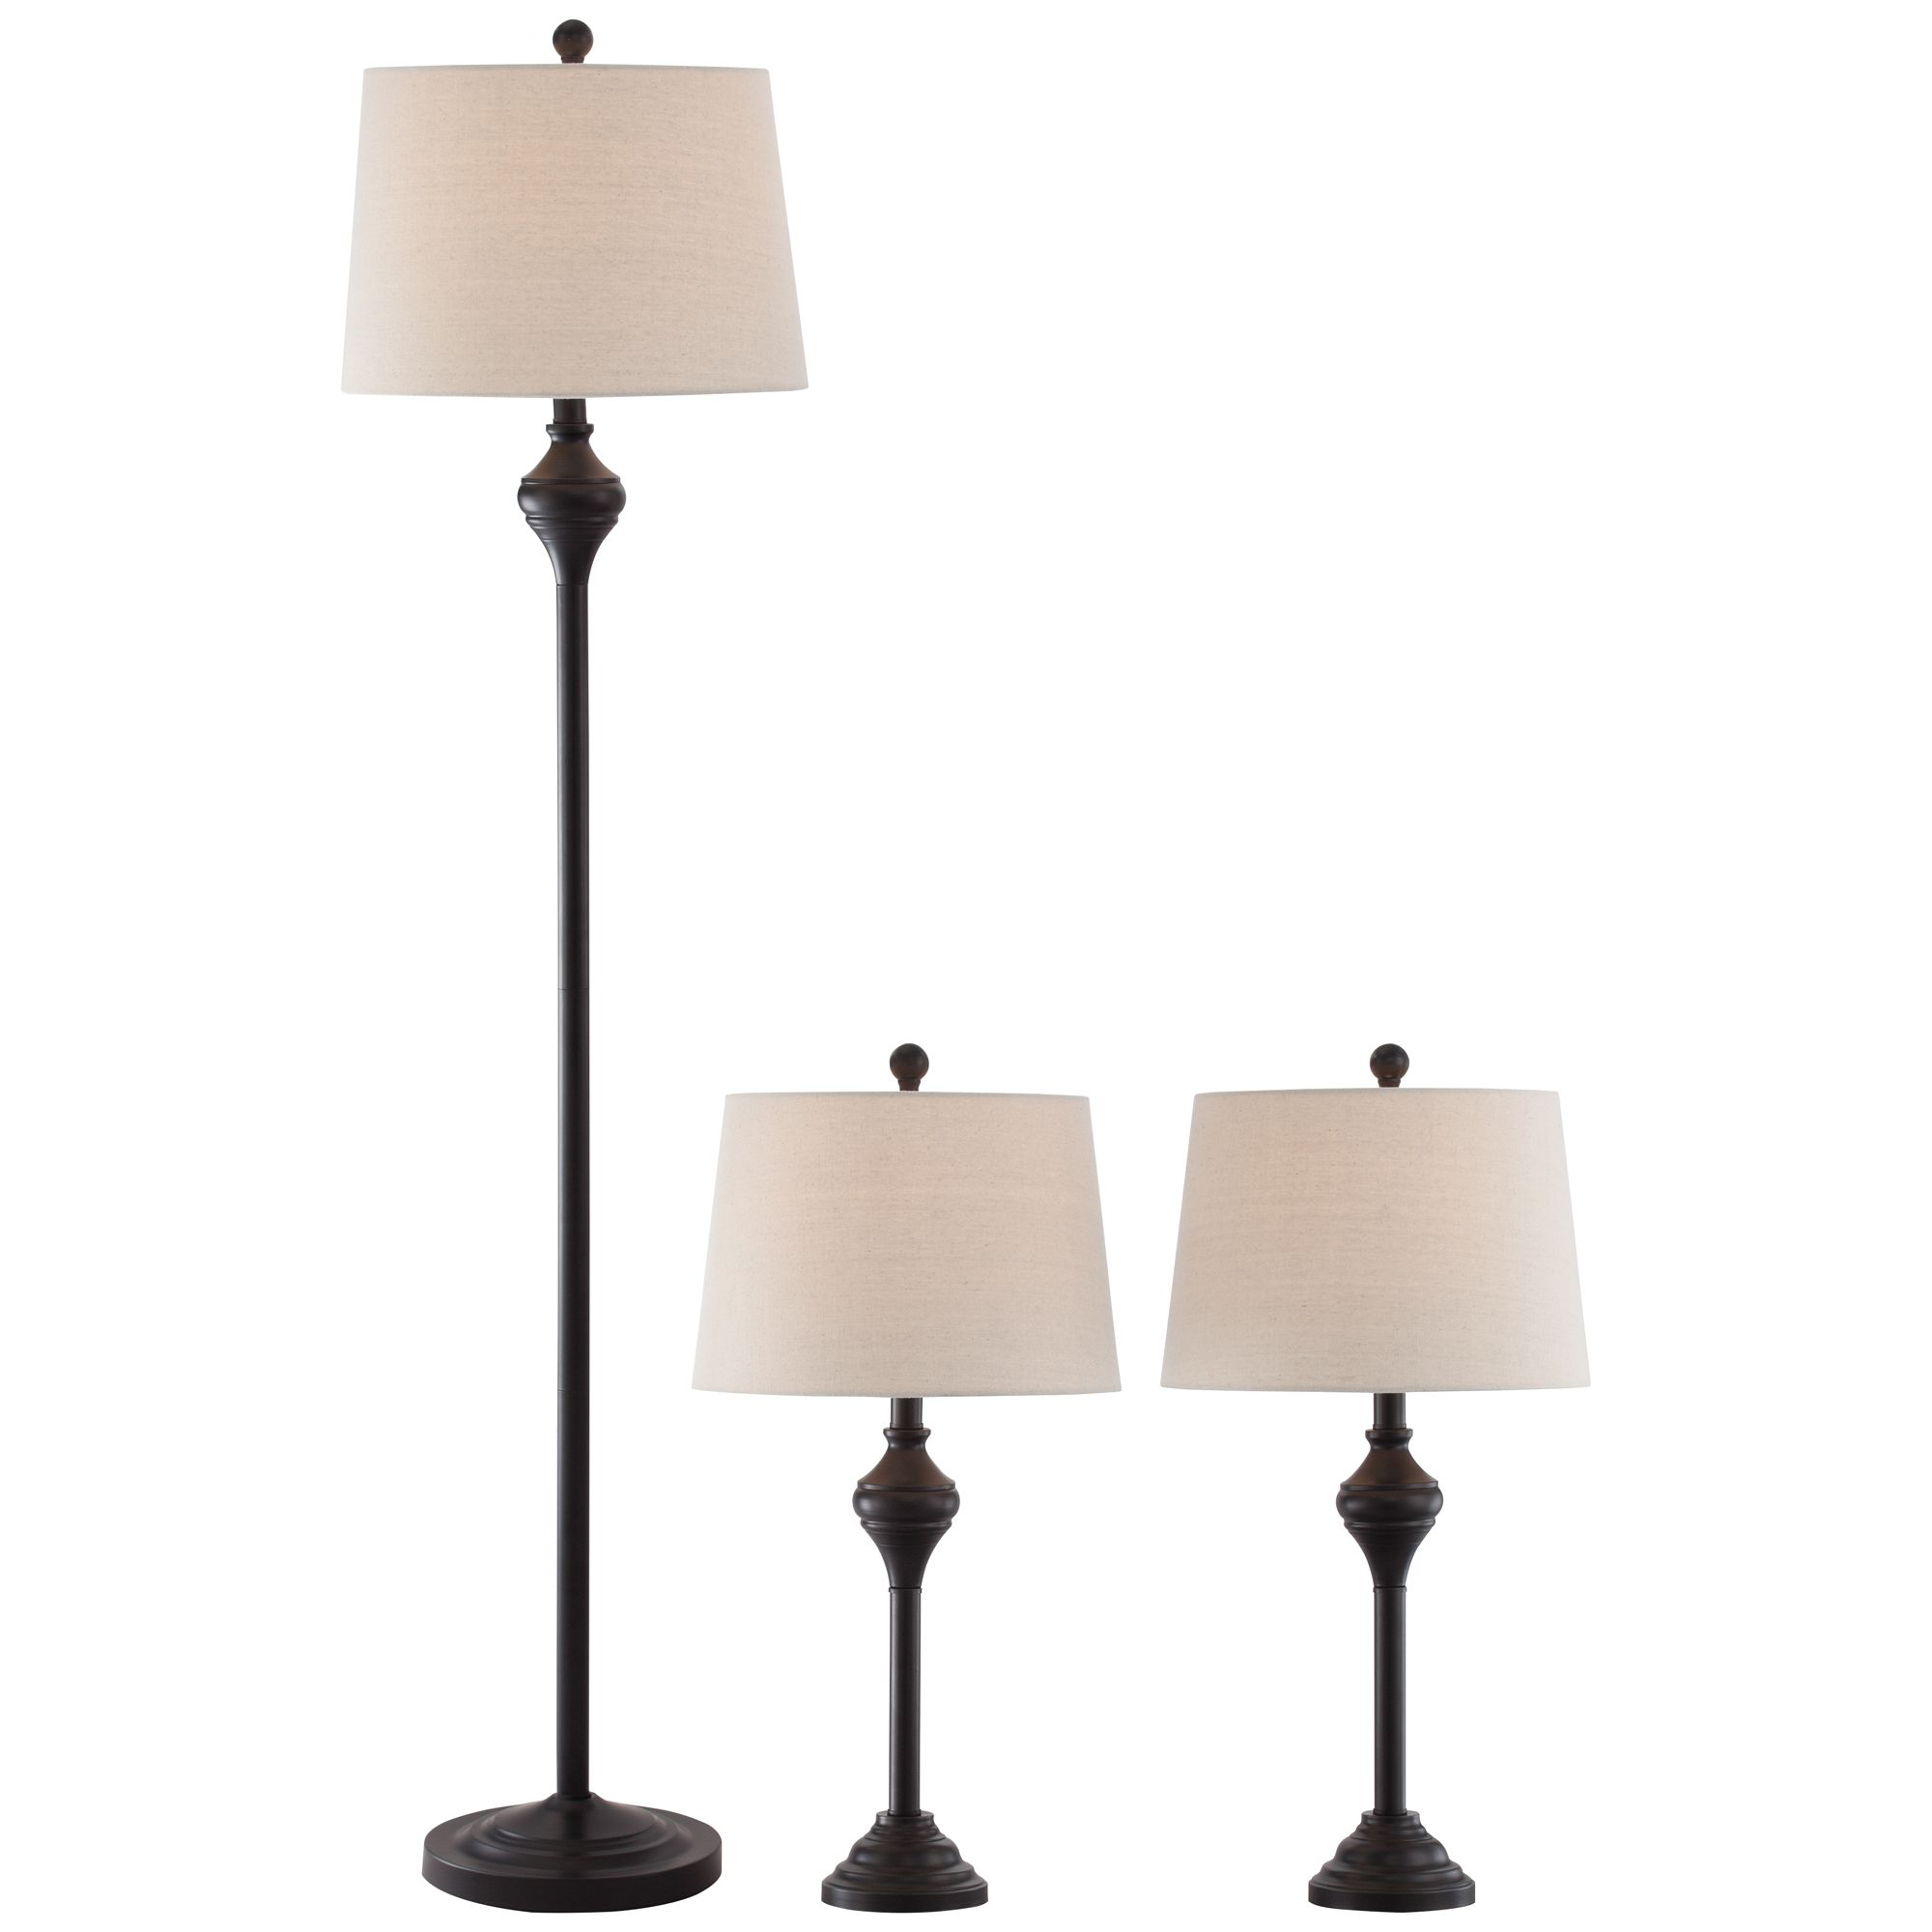 Barnes And Ivy Traditional Table Floor Lamps Set Of 3 Dark Bronze White Tapered Drum Shade For Living Room Family Bedroom Bedside Walmart pertaining to sizing 2000 X 2000